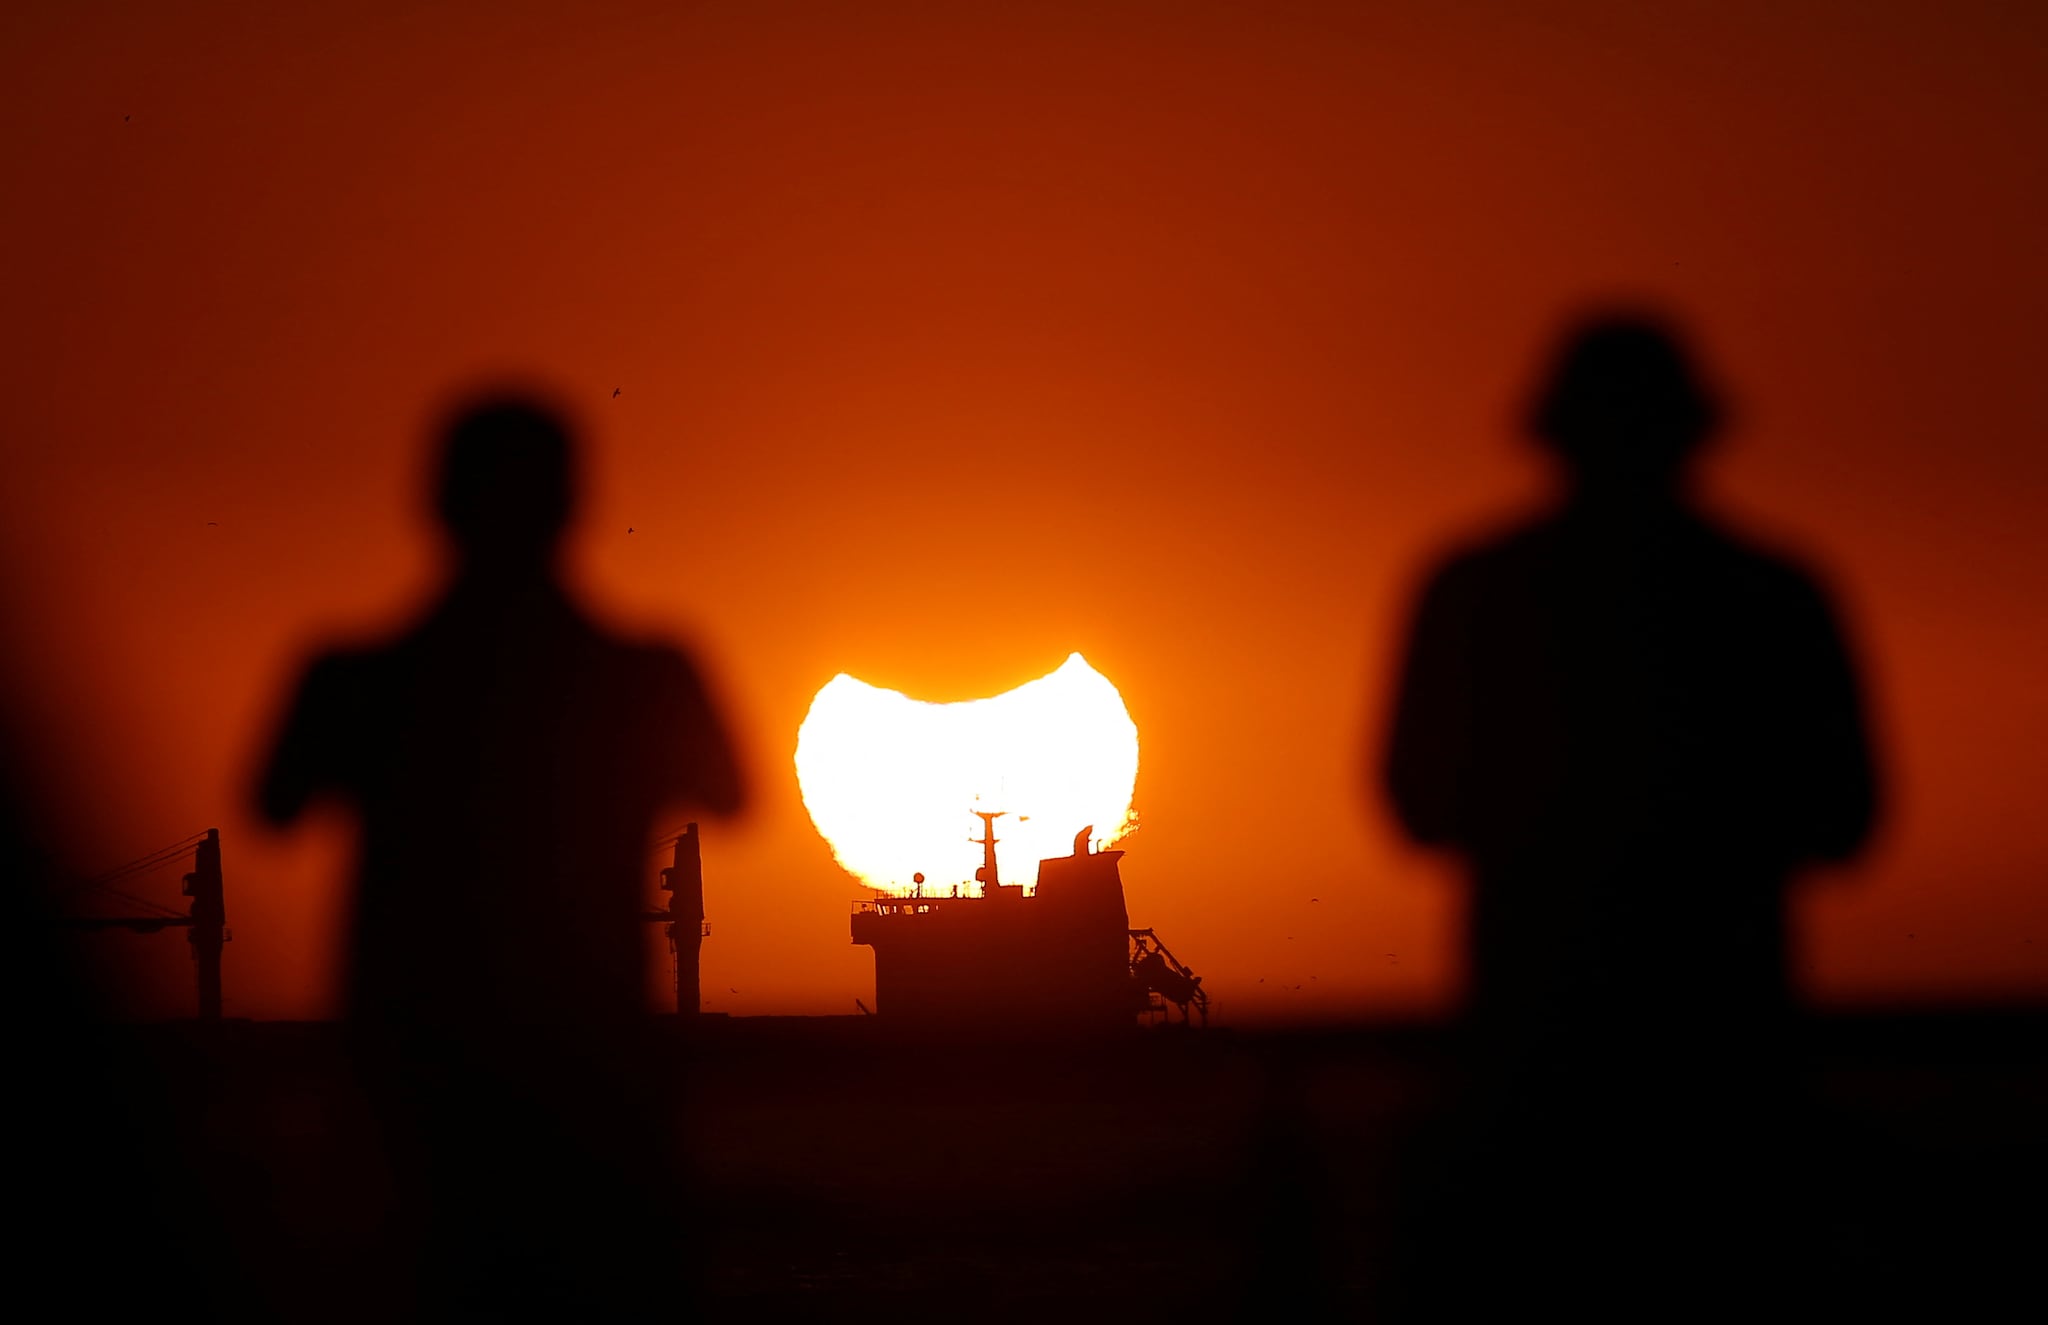 A partial solar eclipse is pictured during sunset in Vina del Mar, Chile on April 30. (Image: Reuters)